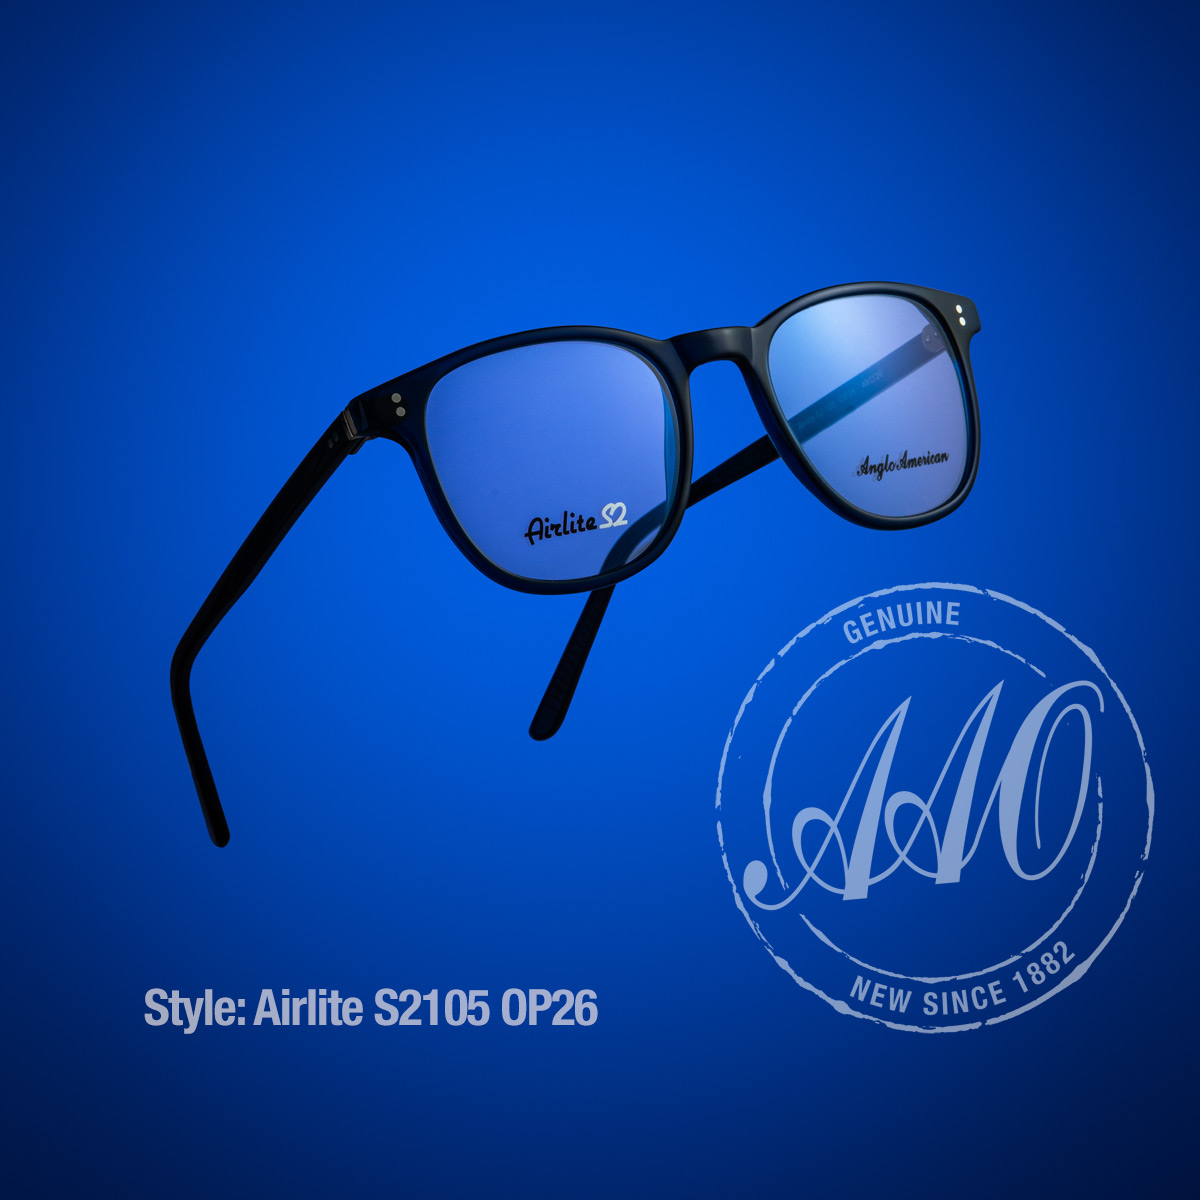 Style: Airlite S2105 OP26